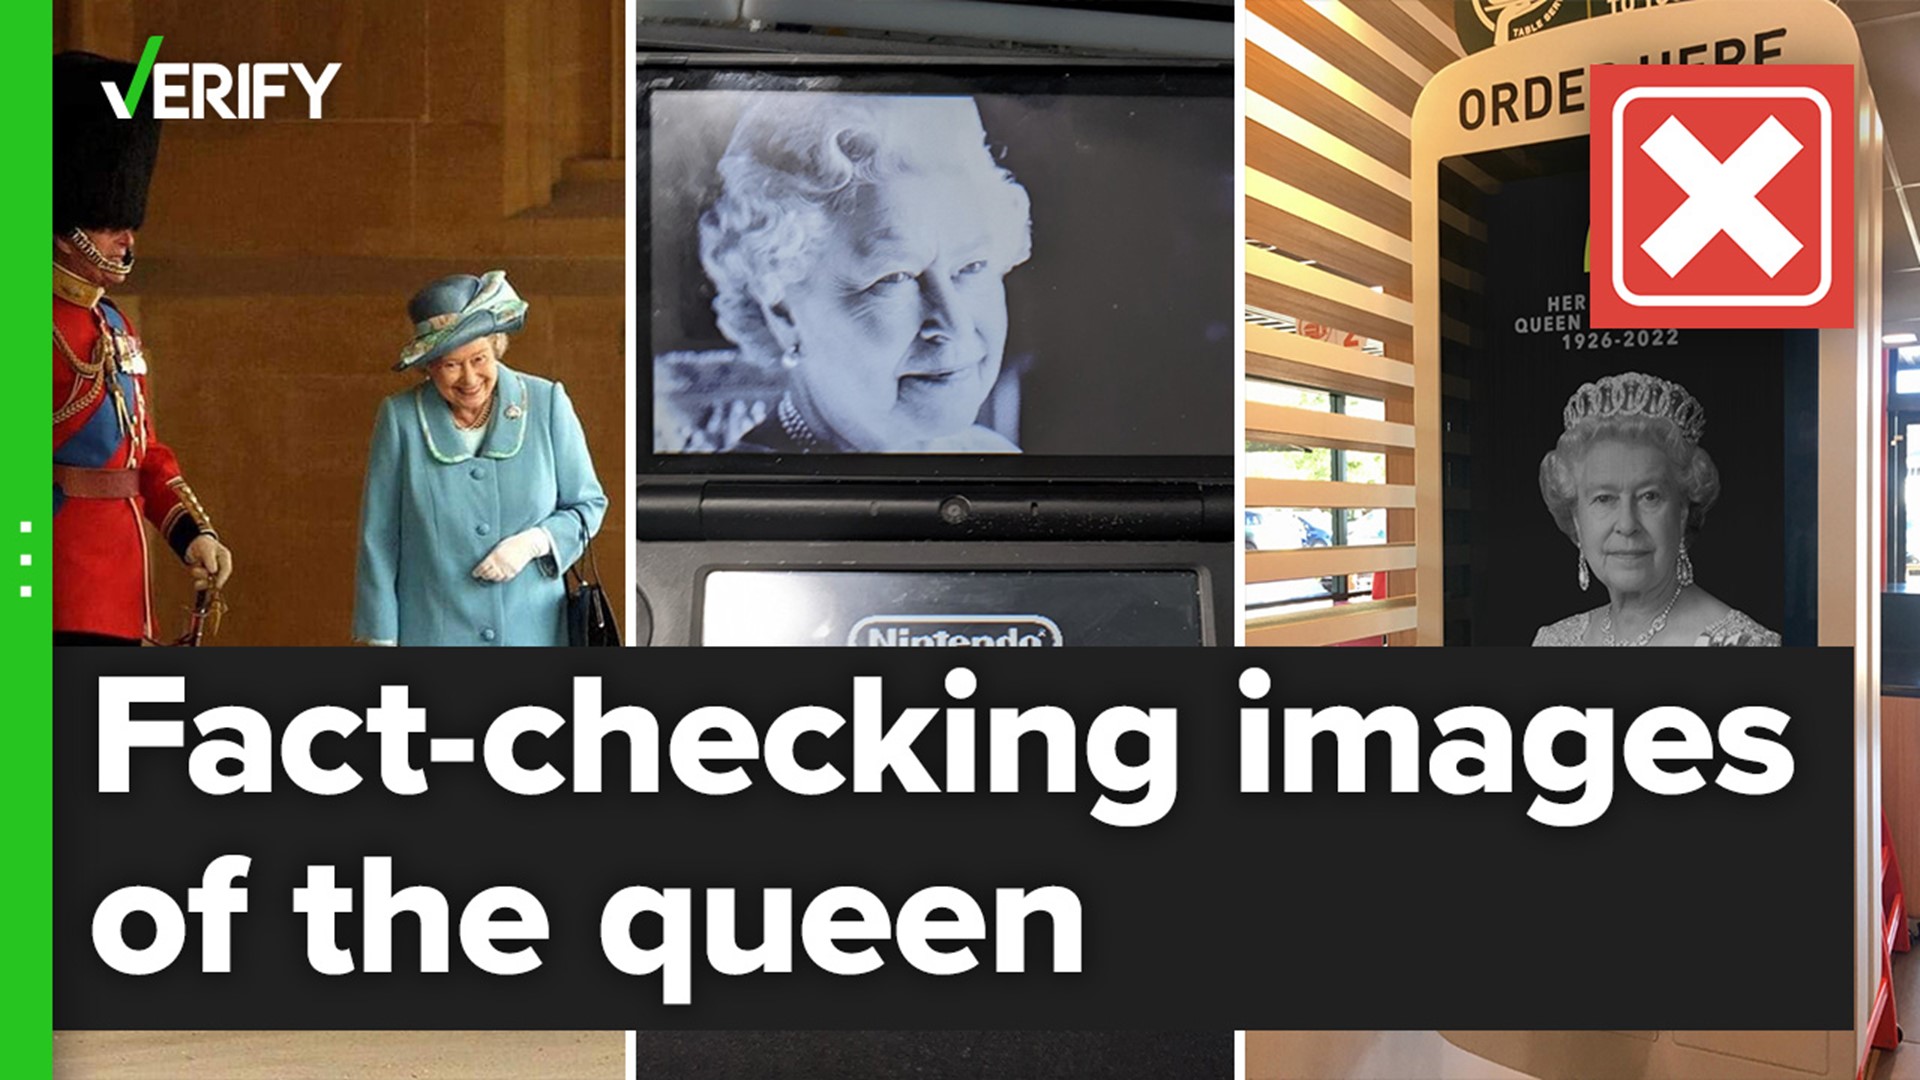 After Queen Elizabeth II died on Sept. 8, several images appeared on social media that were fake or shared out of context.